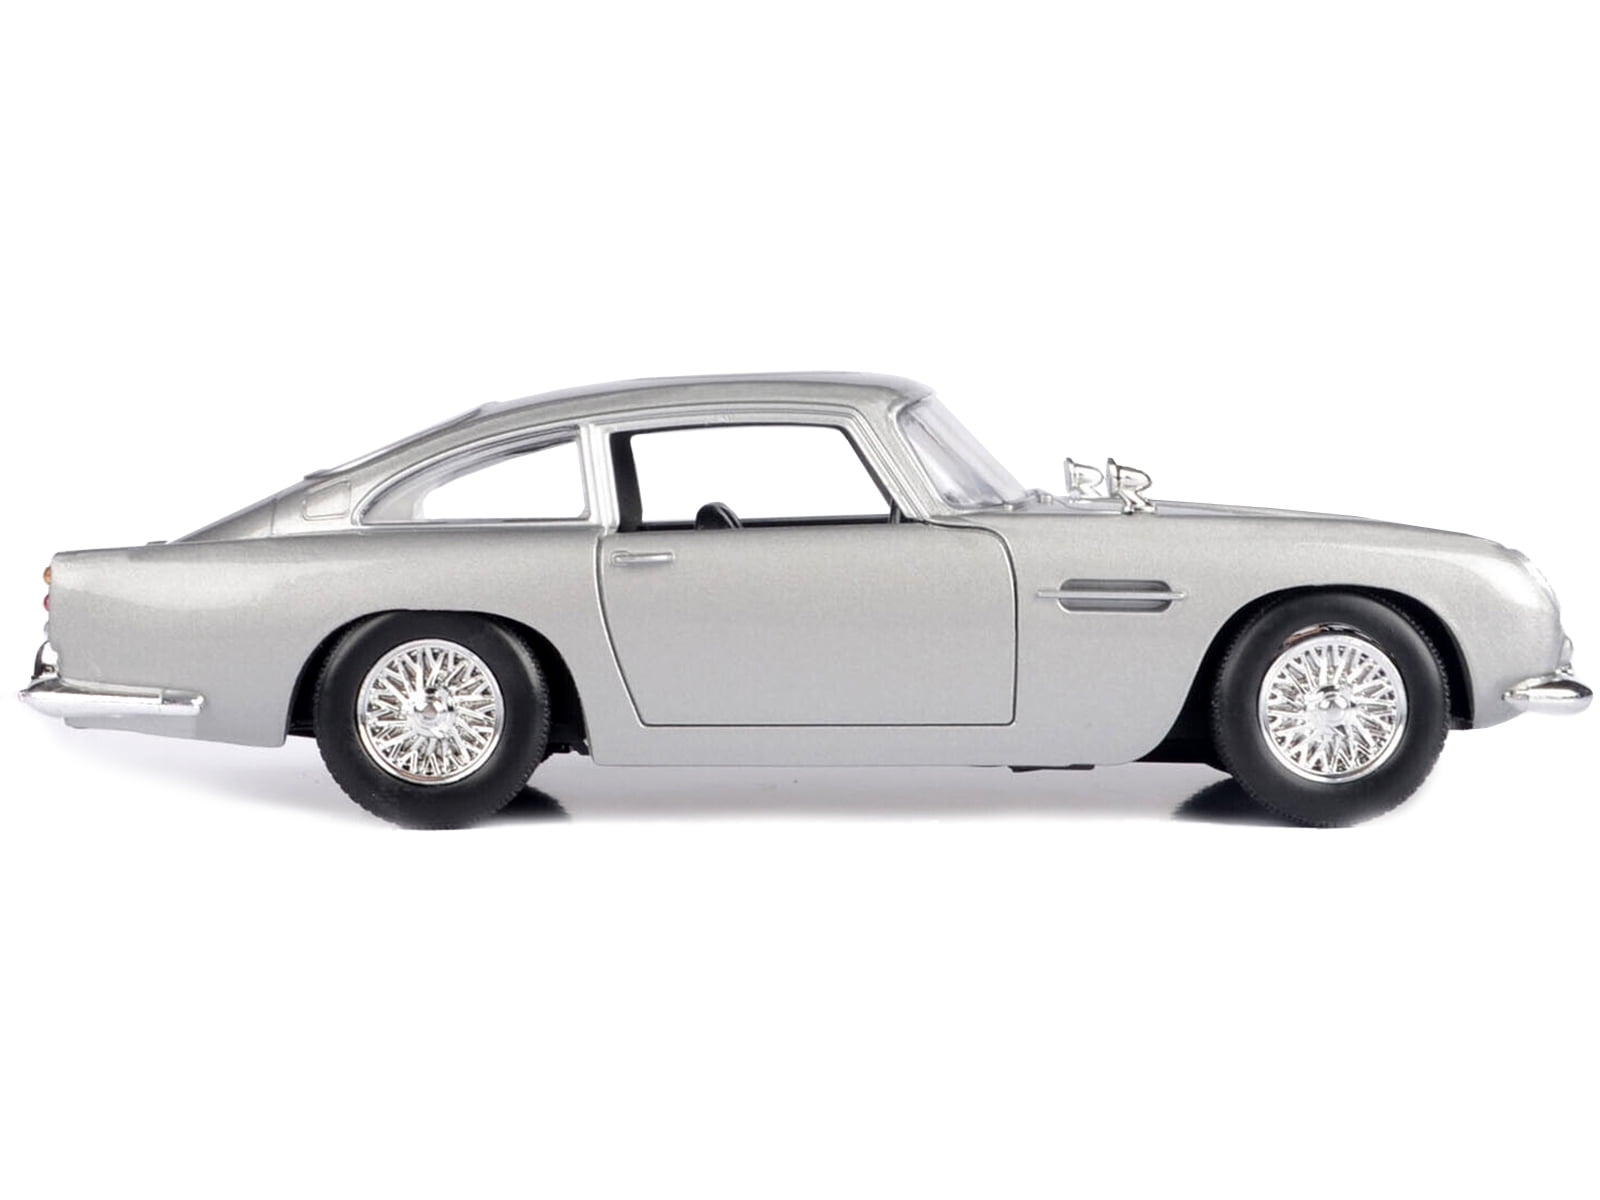 79857 Silver Metallic James Bond 007 Goldfinger 1964 Movie James Bond Collection Series 1 by 24 Scale Diecast Model Car for Aston Martin DB5 RHD -  MOTORMAX